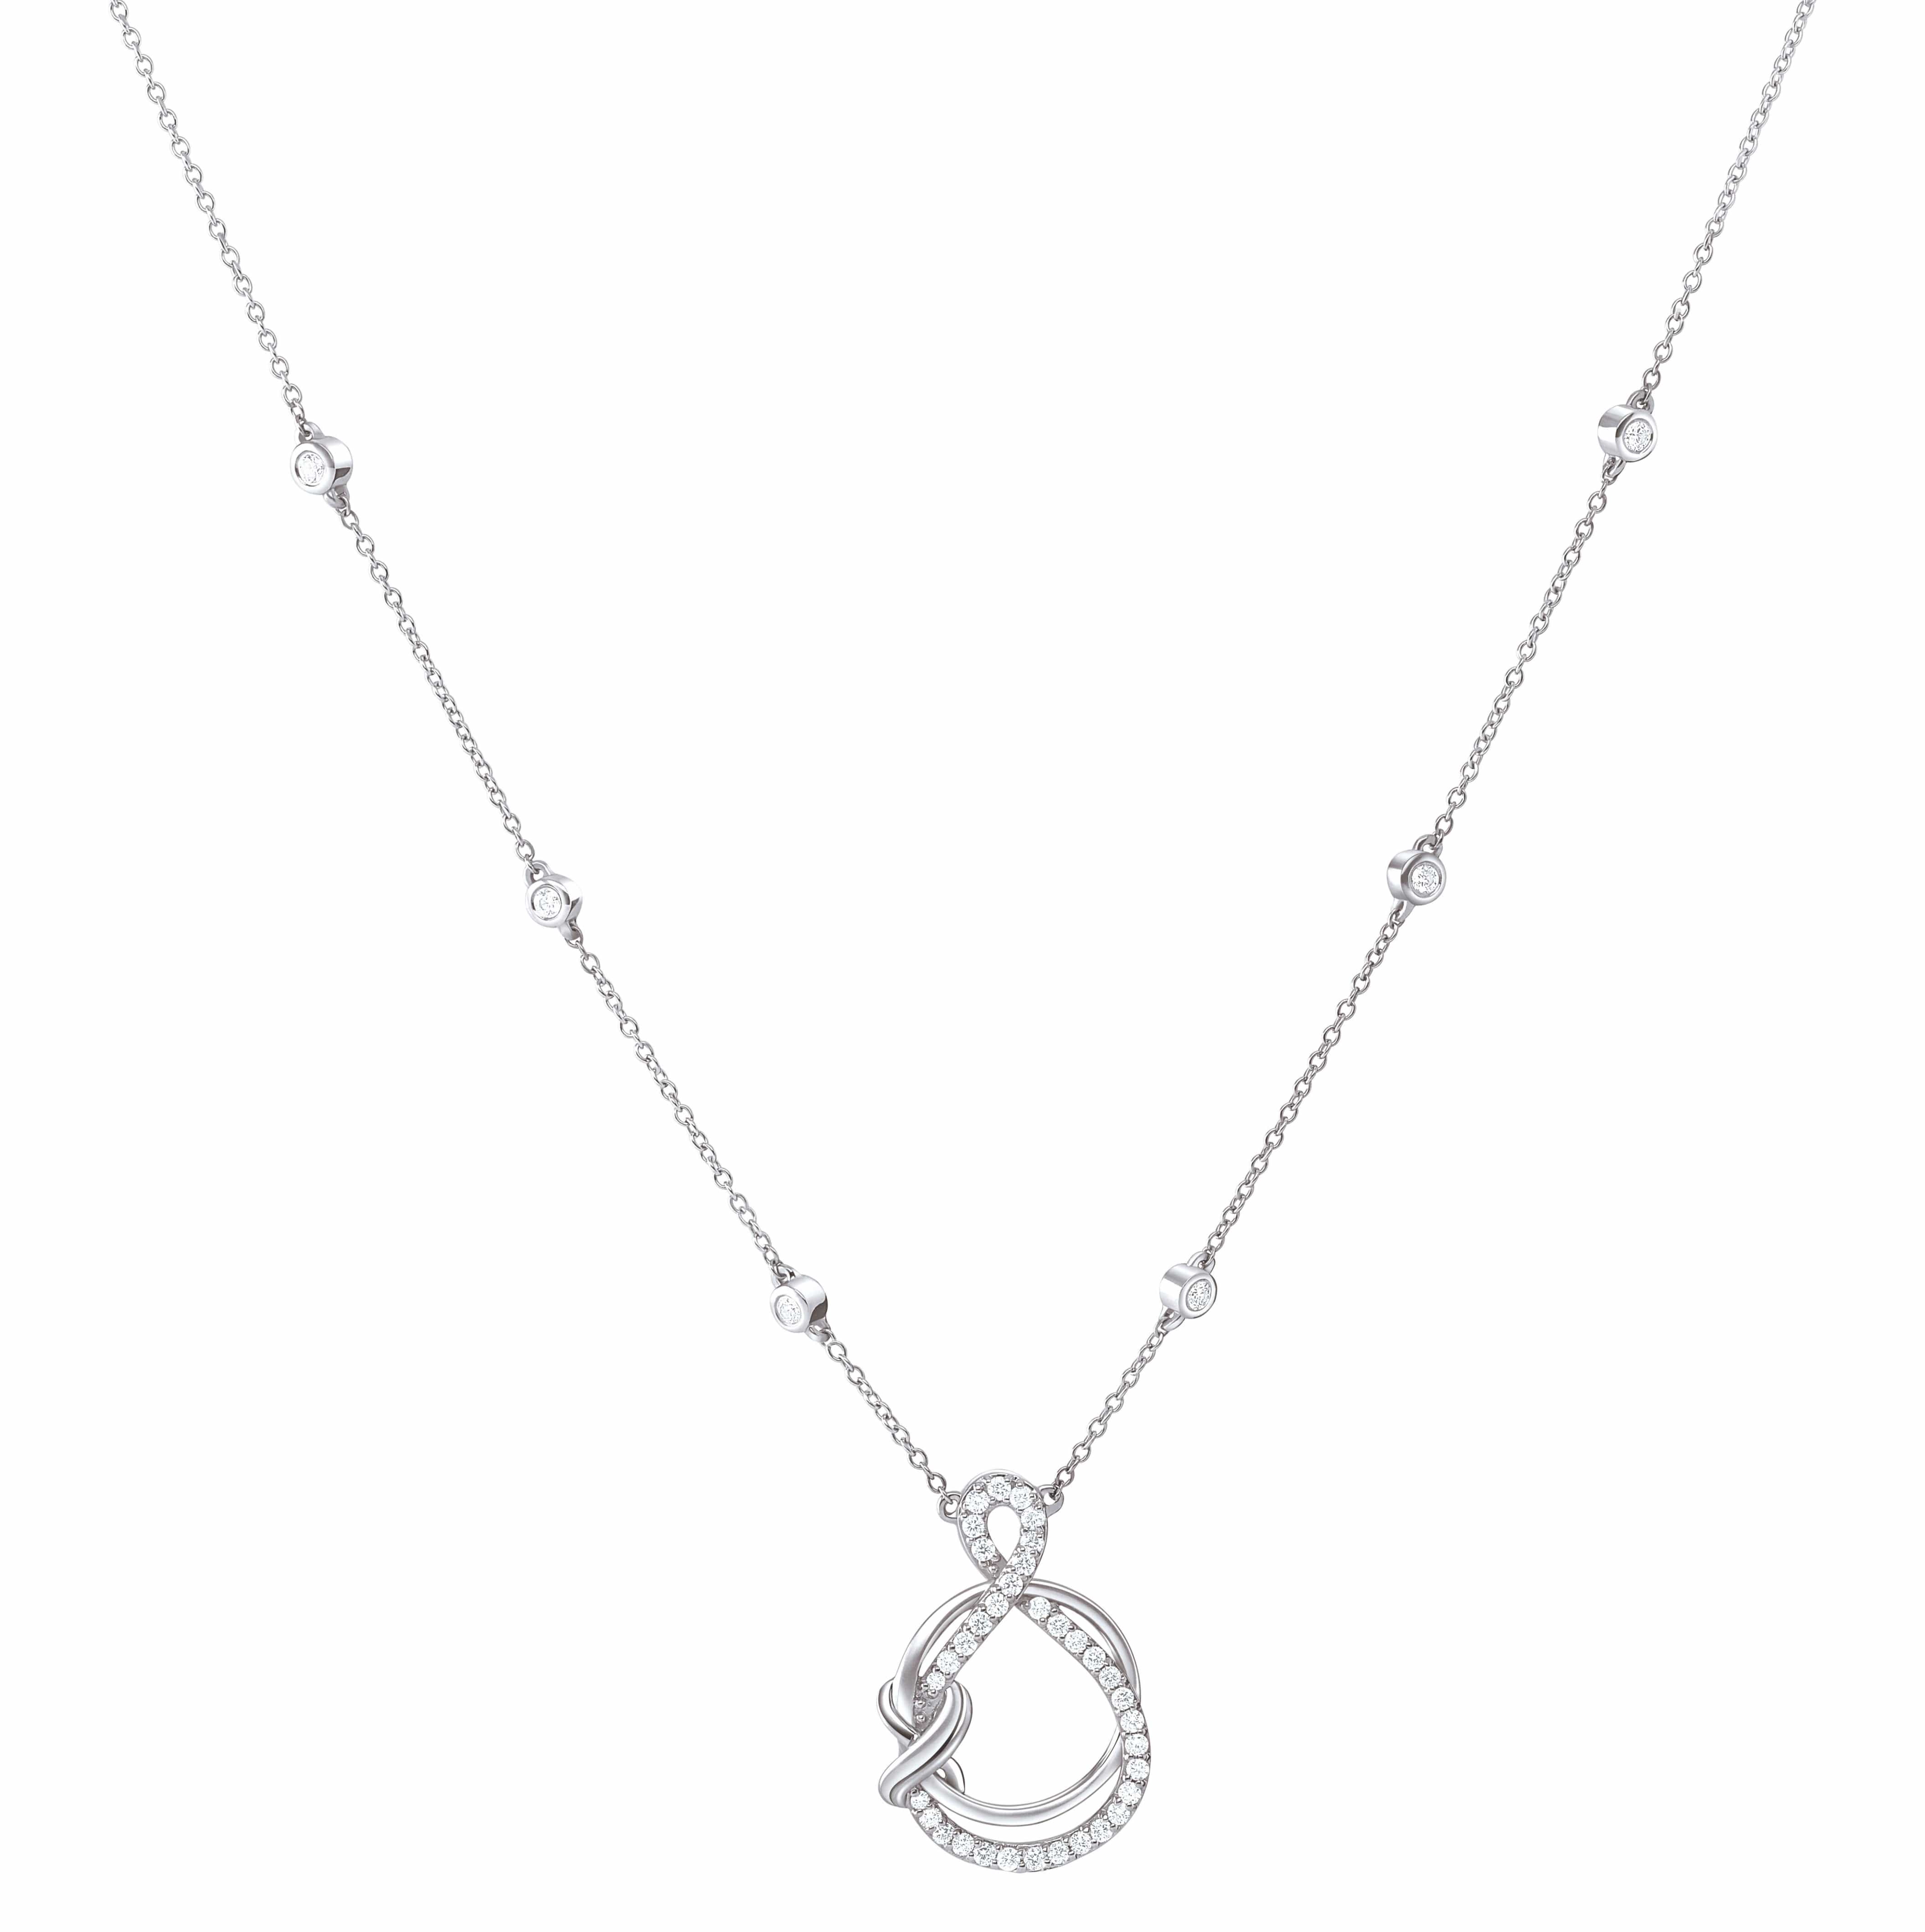 JewelersClub 0.925 Sterling Silver Heart Necklace with 0.10 Carat White  Diamonds | Jewelry Pendant Necklaces for Women White Diamonds & 18 inch  Rope Chain with Spring Clasp - Walmart.com